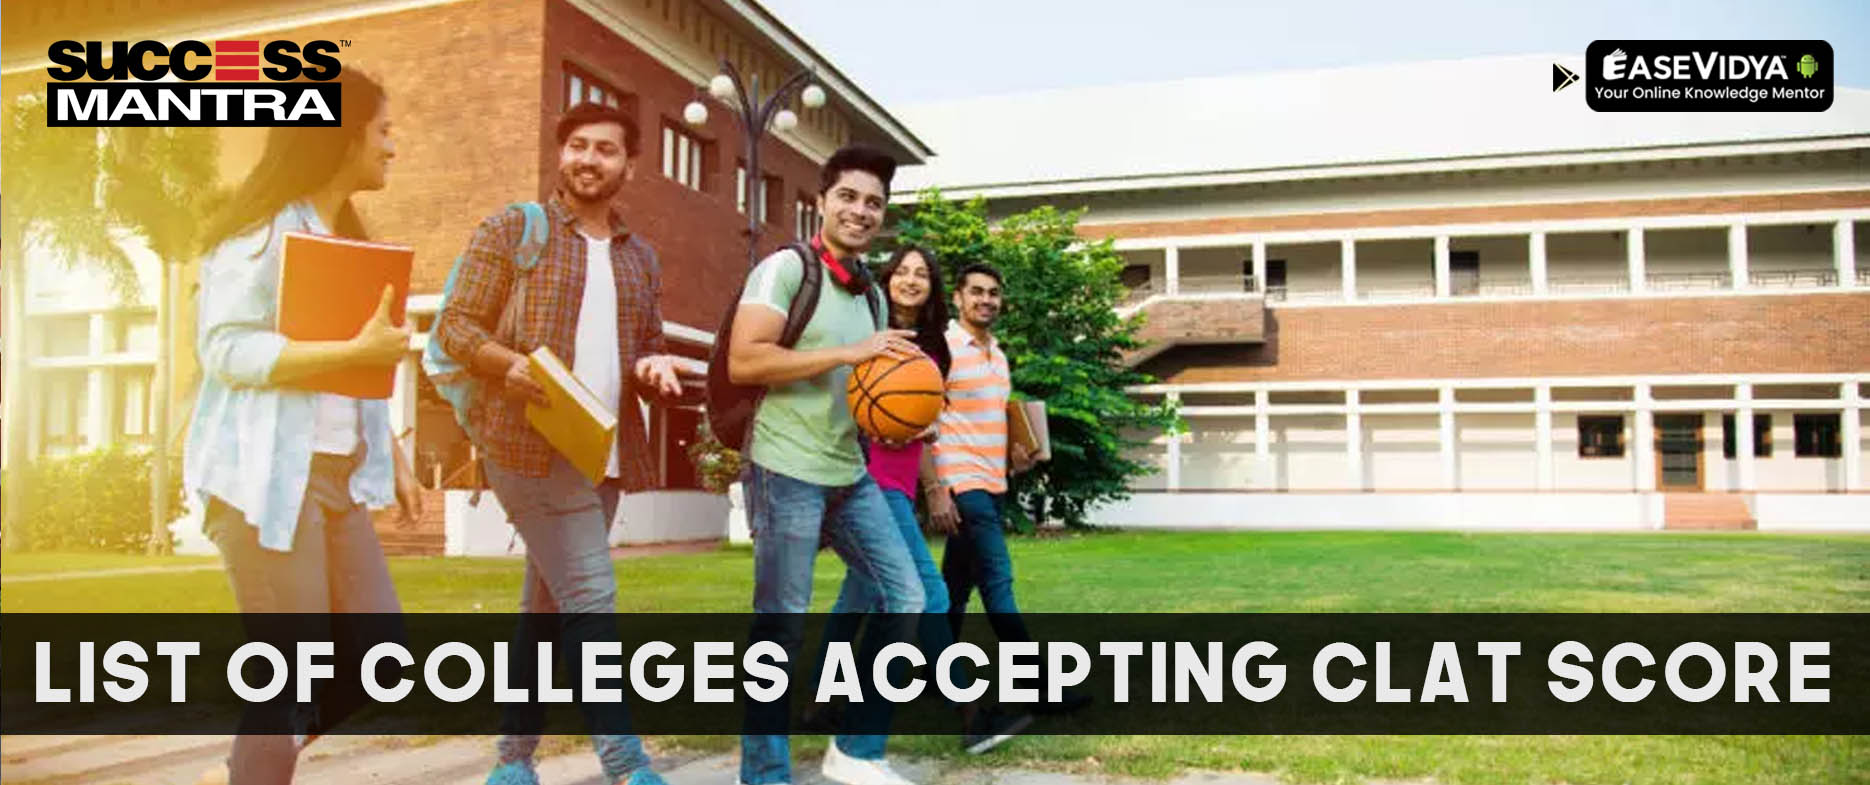 List of Colleges Accepting CLAT Score